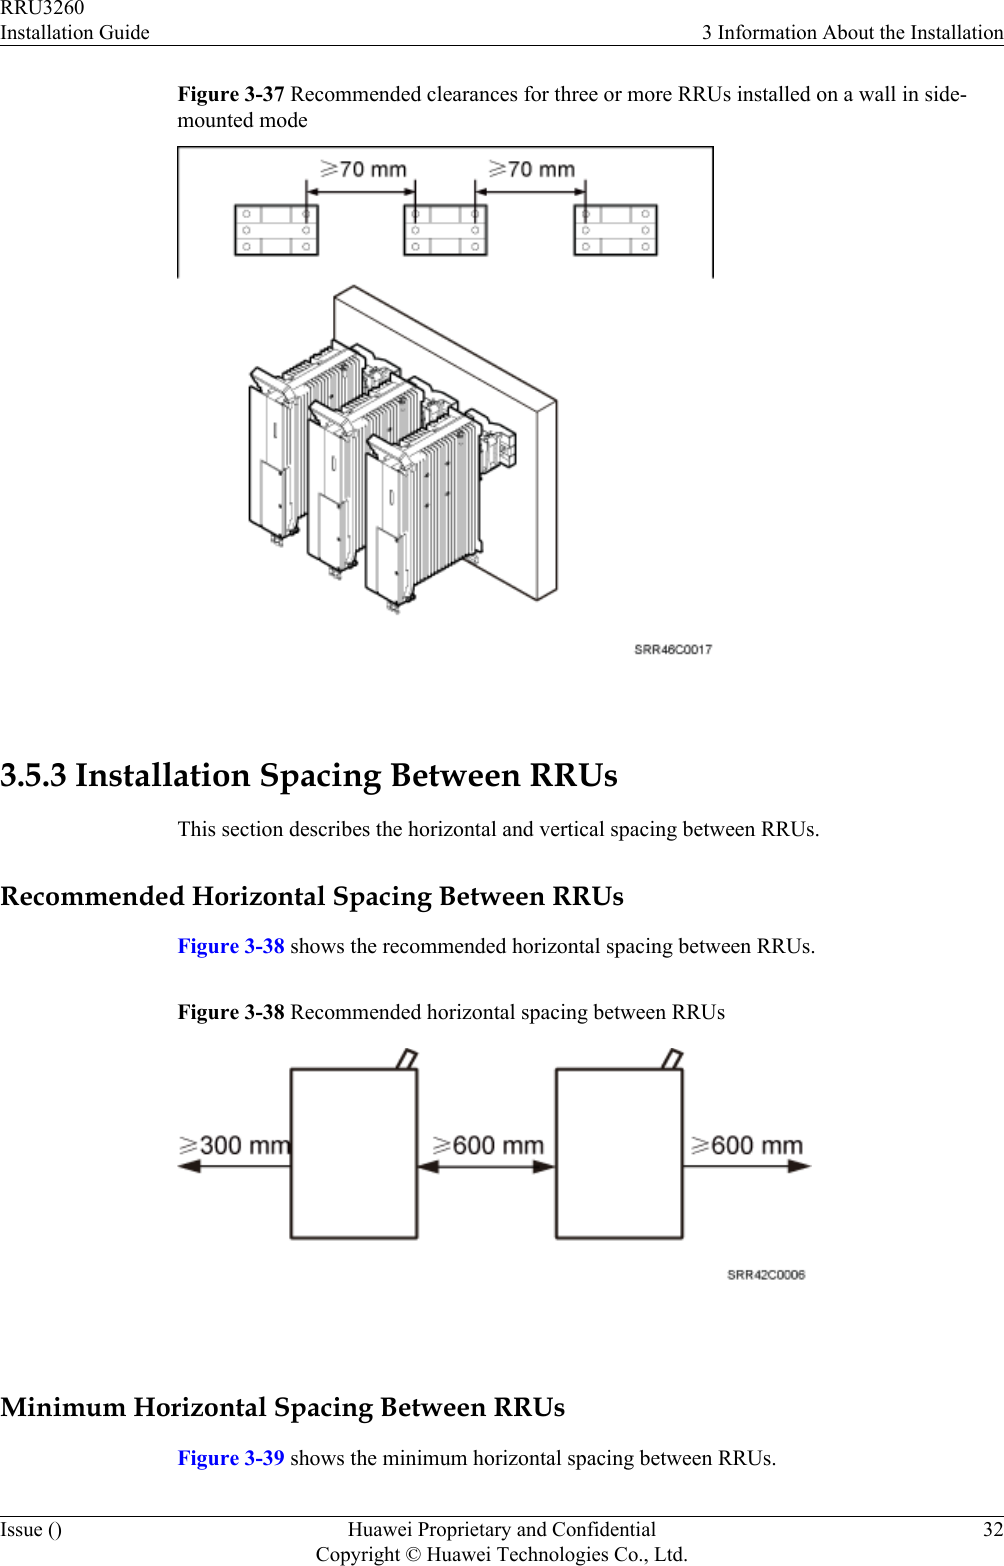 Figure 3-37 Recommended clearances for three or more RRUs installed on a wall in side-mounted mode 3.5.3 Installation Spacing Between RRUsThis section describes the horizontal and vertical spacing between RRUs.Recommended Horizontal Spacing Between RRUsFigure 3-38 shows the recommended horizontal spacing between RRUs.Figure 3-38 Recommended horizontal spacing between RRUs Minimum Horizontal Spacing Between RRUsFigure 3-39 shows the minimum horizontal spacing between RRUs.RRU3260Installation Guide 3 Information About the InstallationIssue () Huawei Proprietary and ConfidentialCopyright © Huawei Technologies Co., Ltd.32